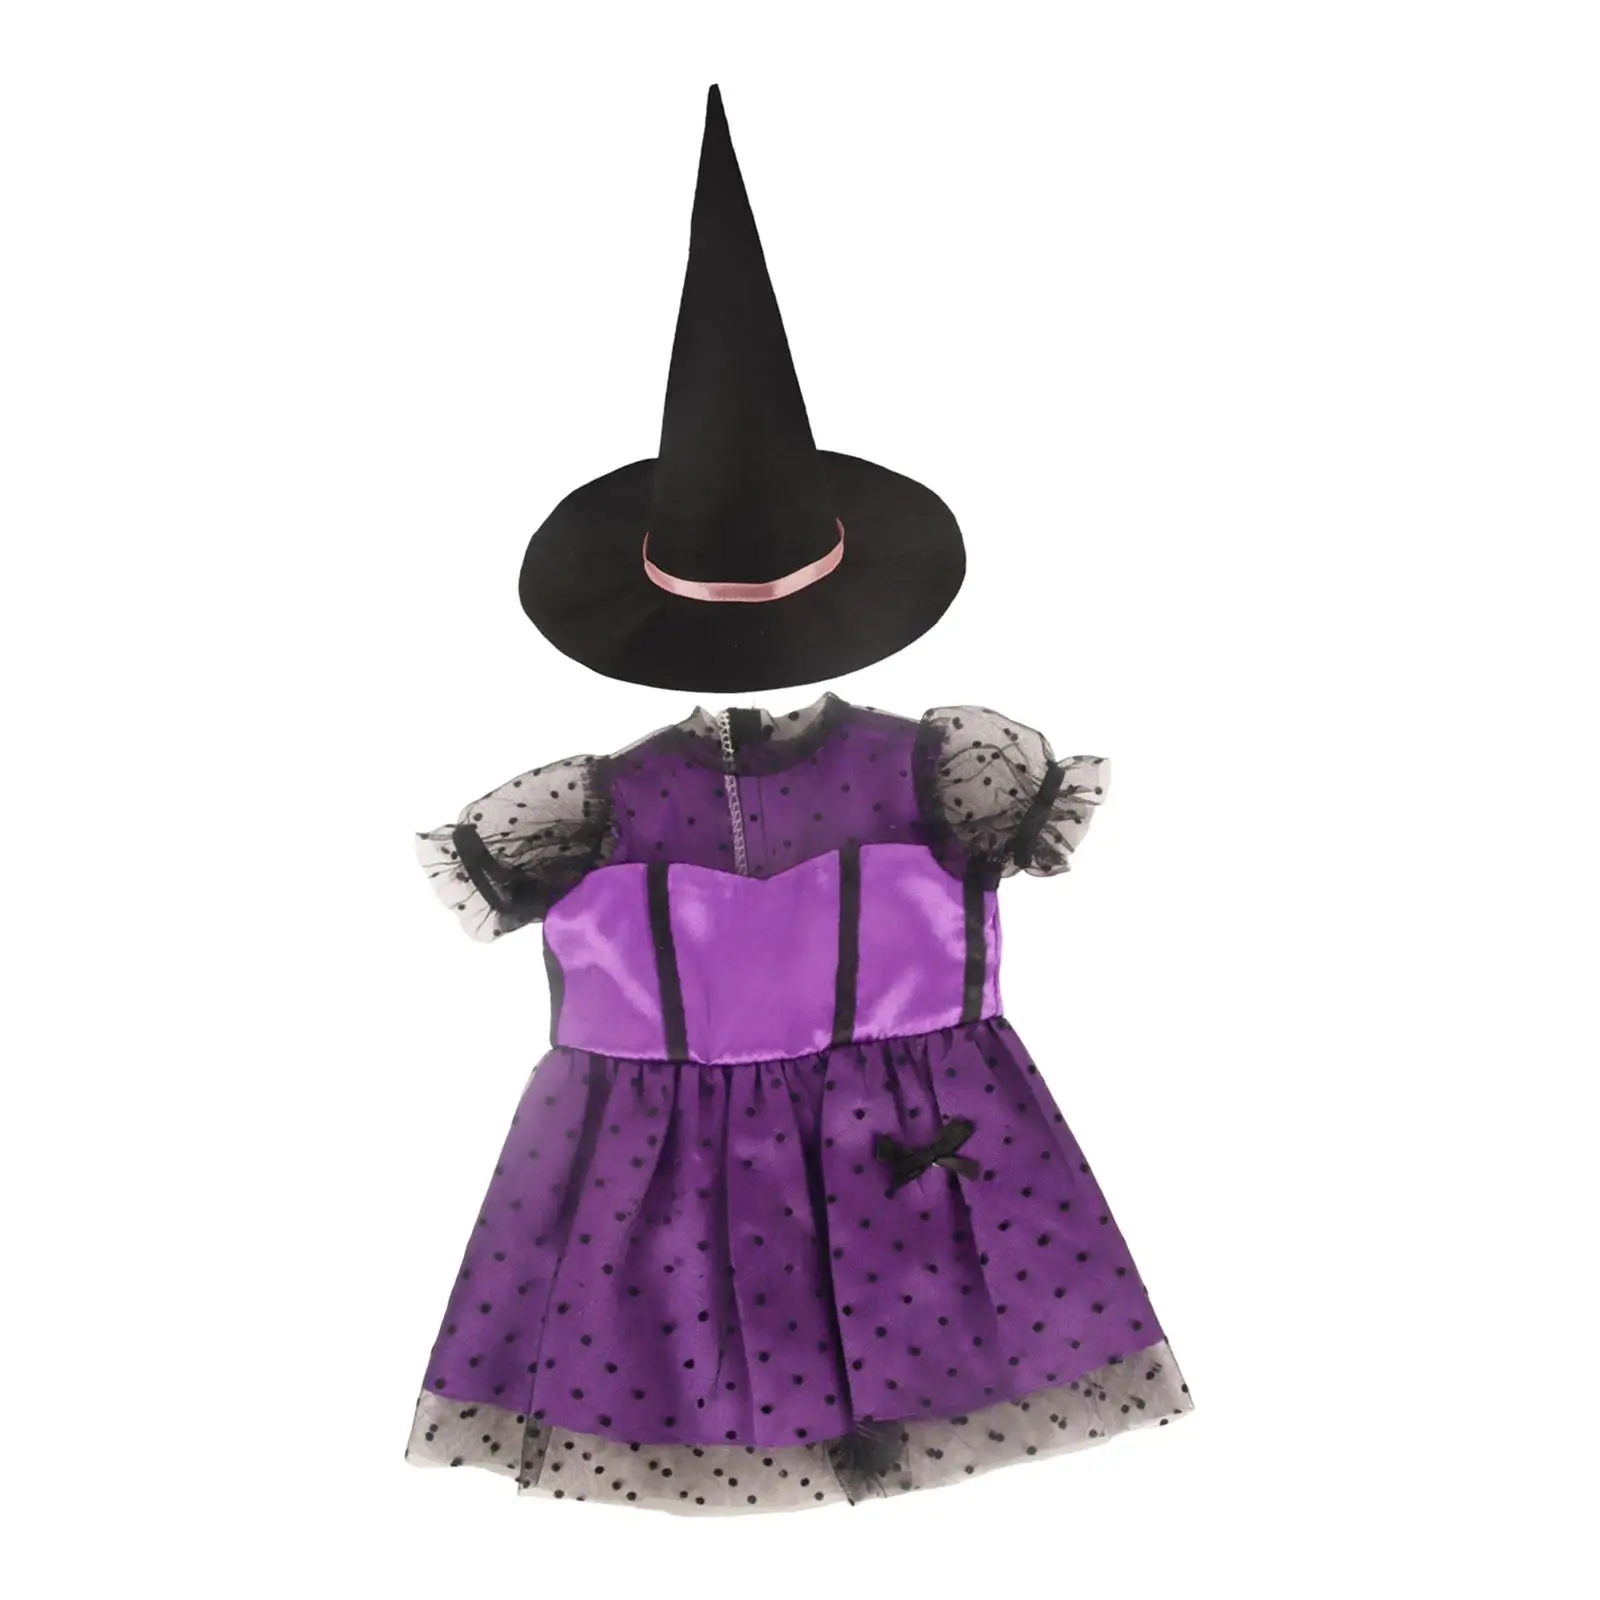 18 inch Girl Doll Dress Hat Halloween Doll Costumes for Dress up Party